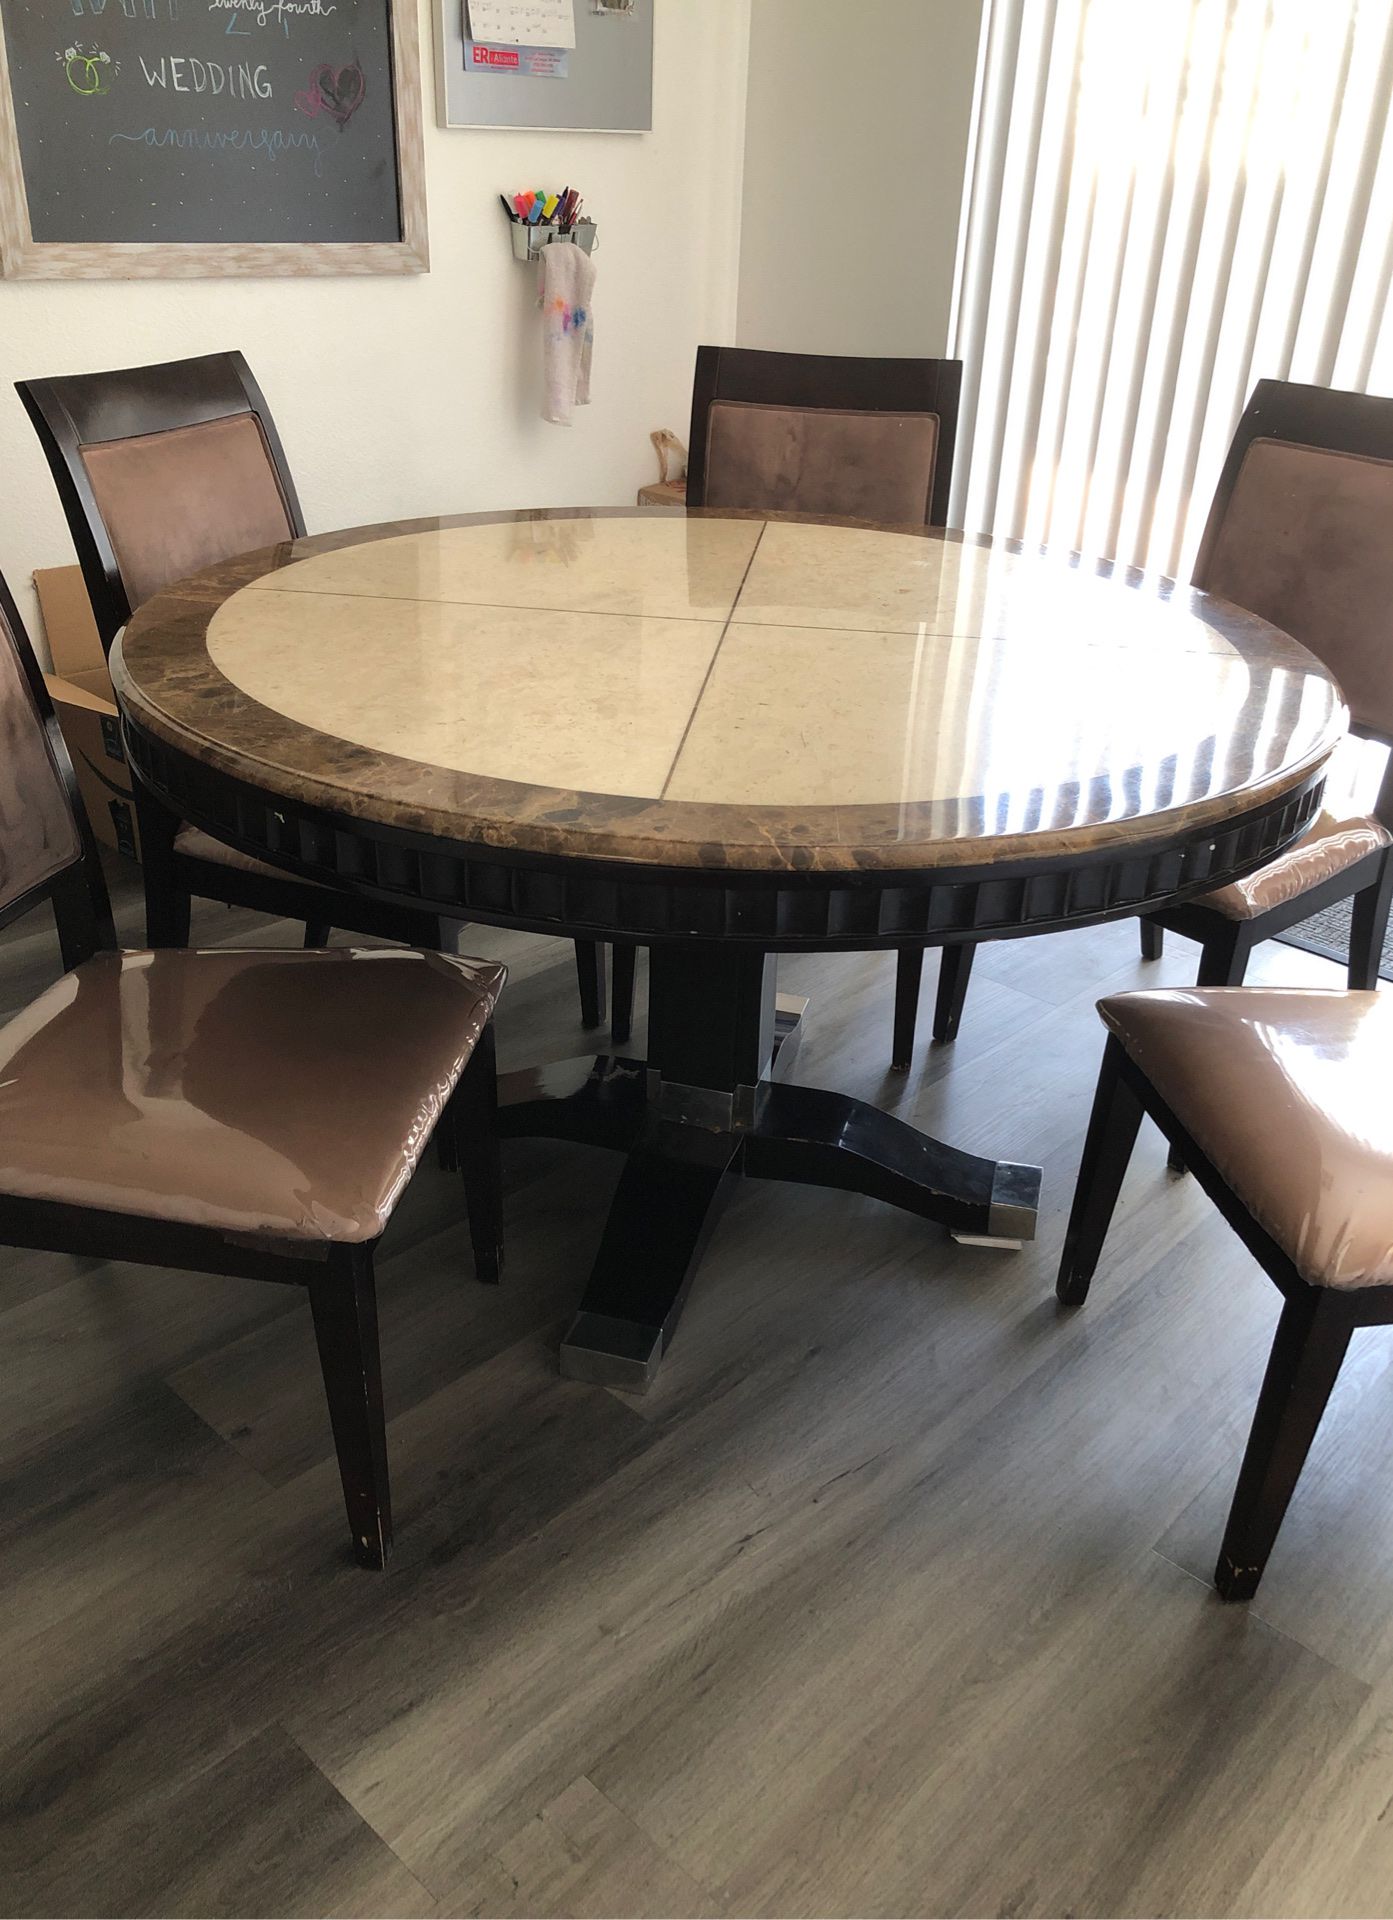 Granite kitchen table and 5 chairs